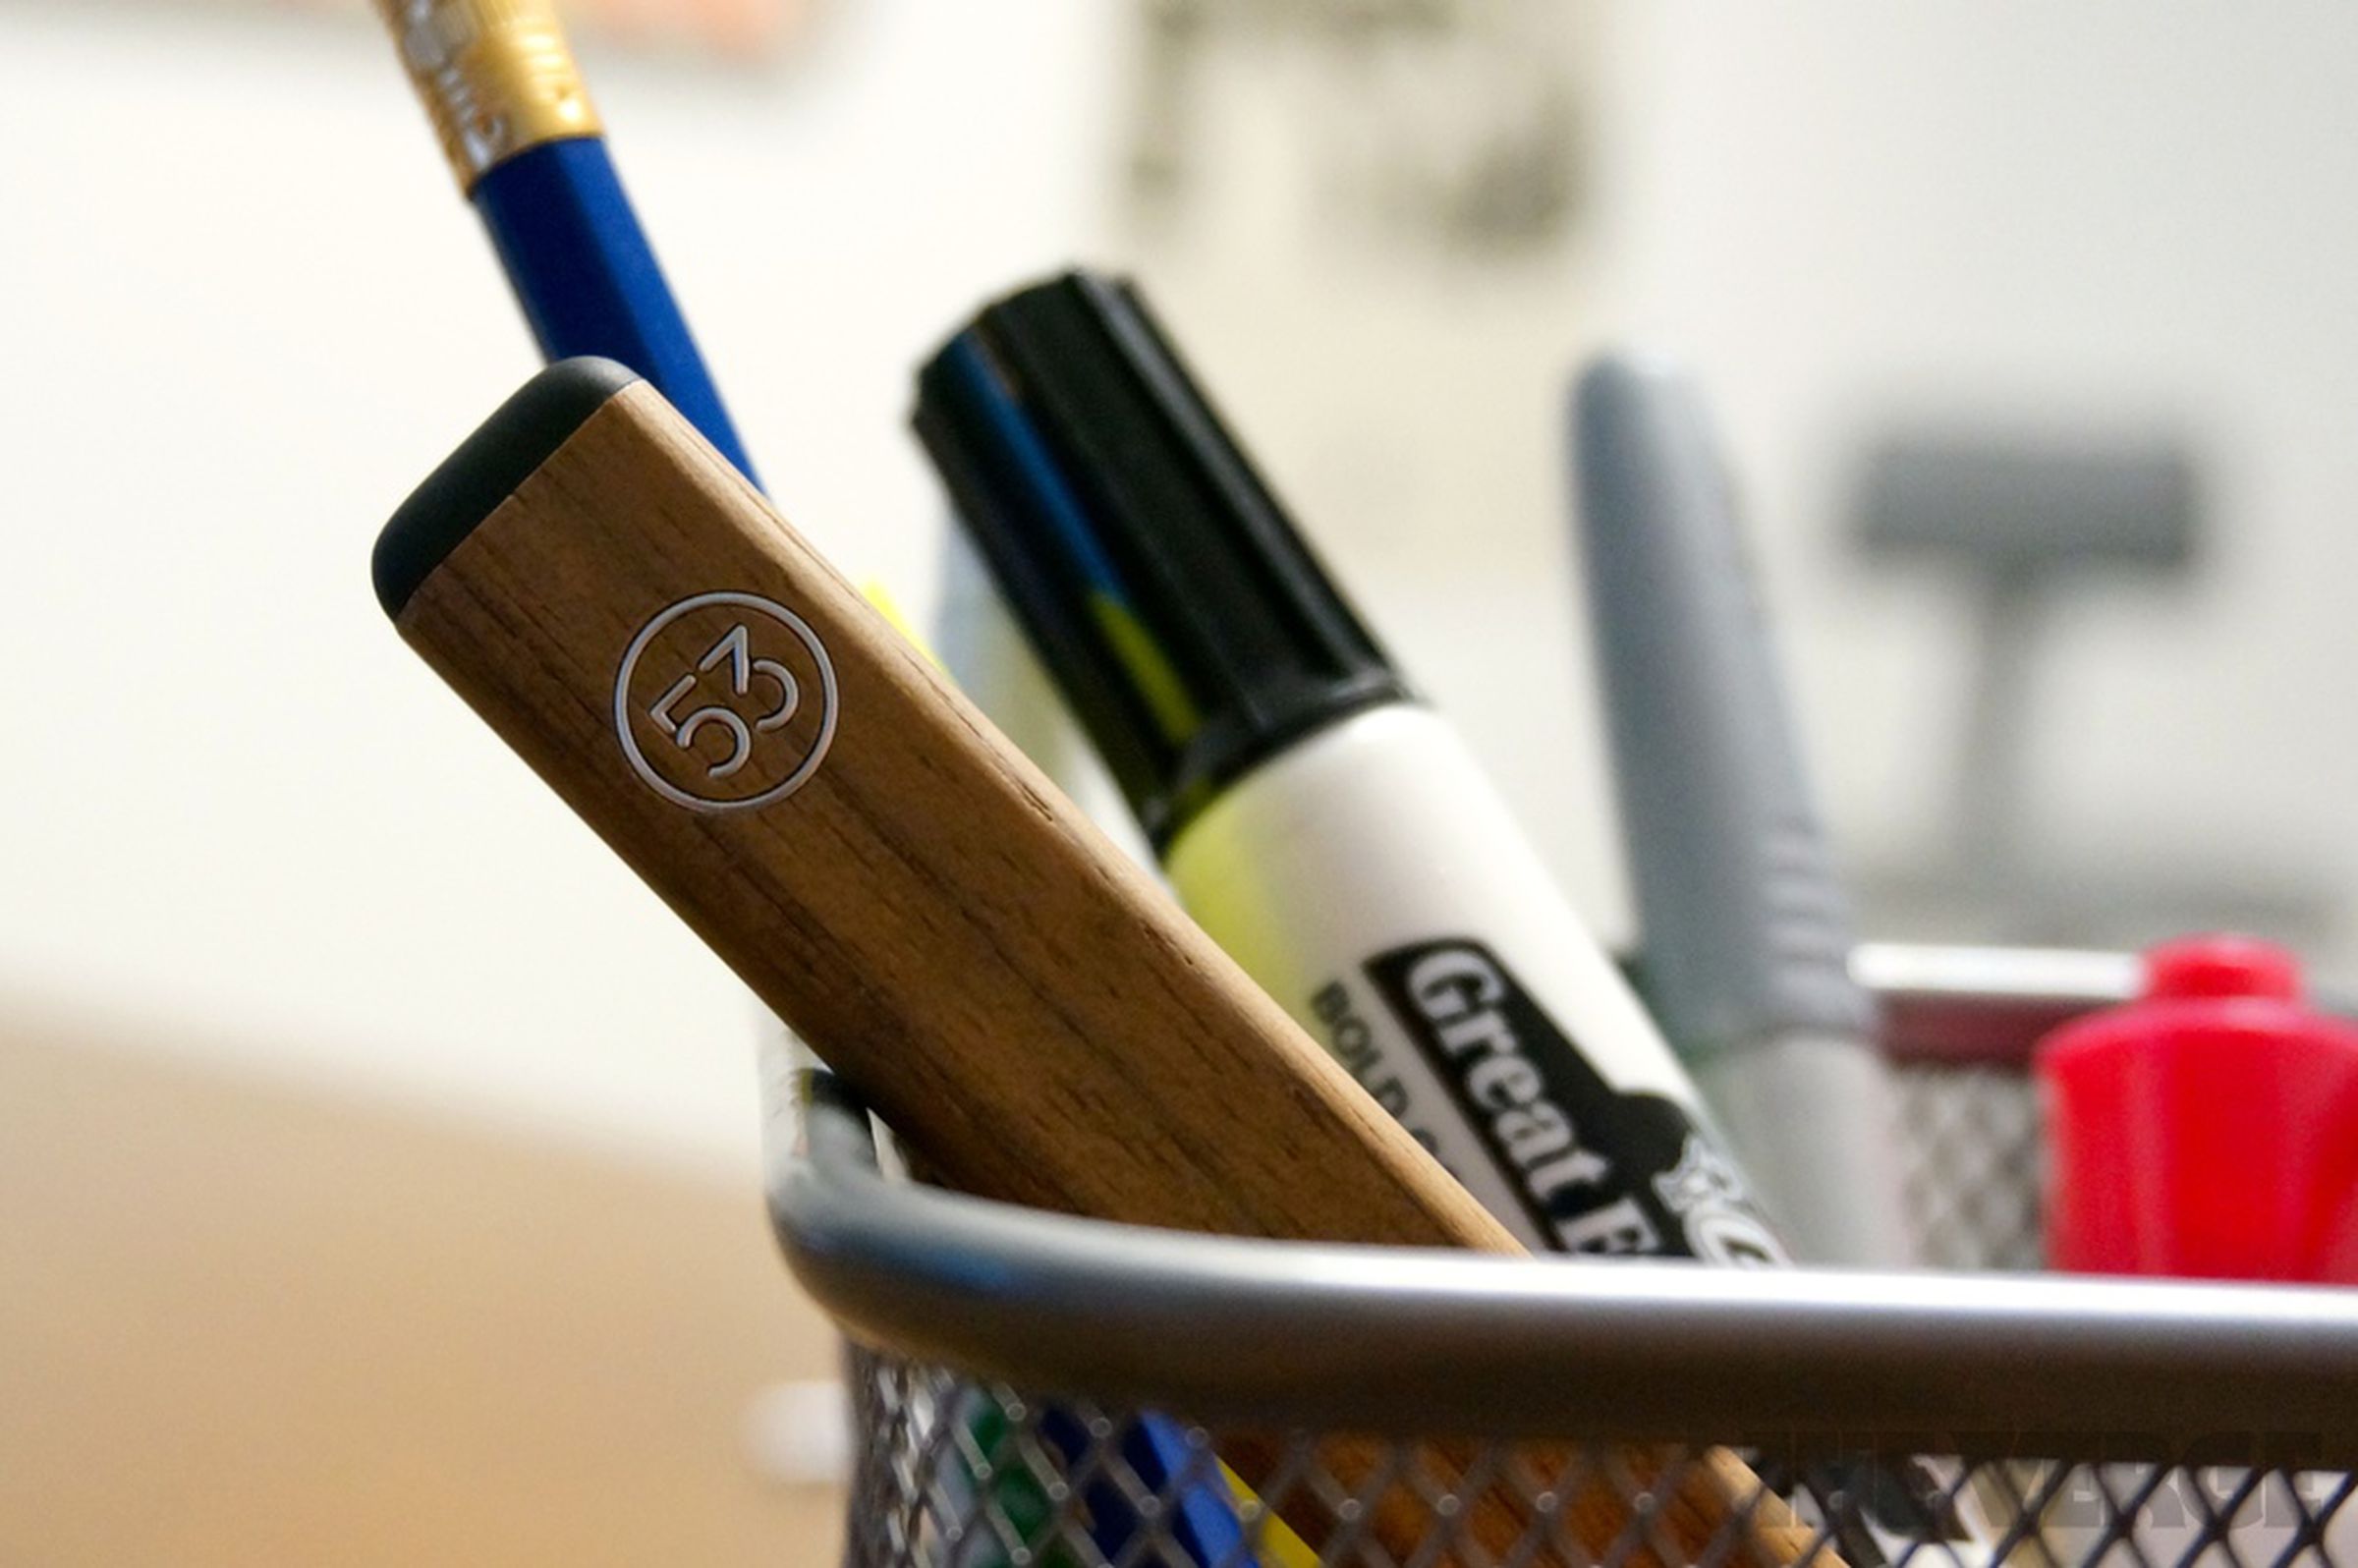 FiftyThree Pencil stylus hands-on photos